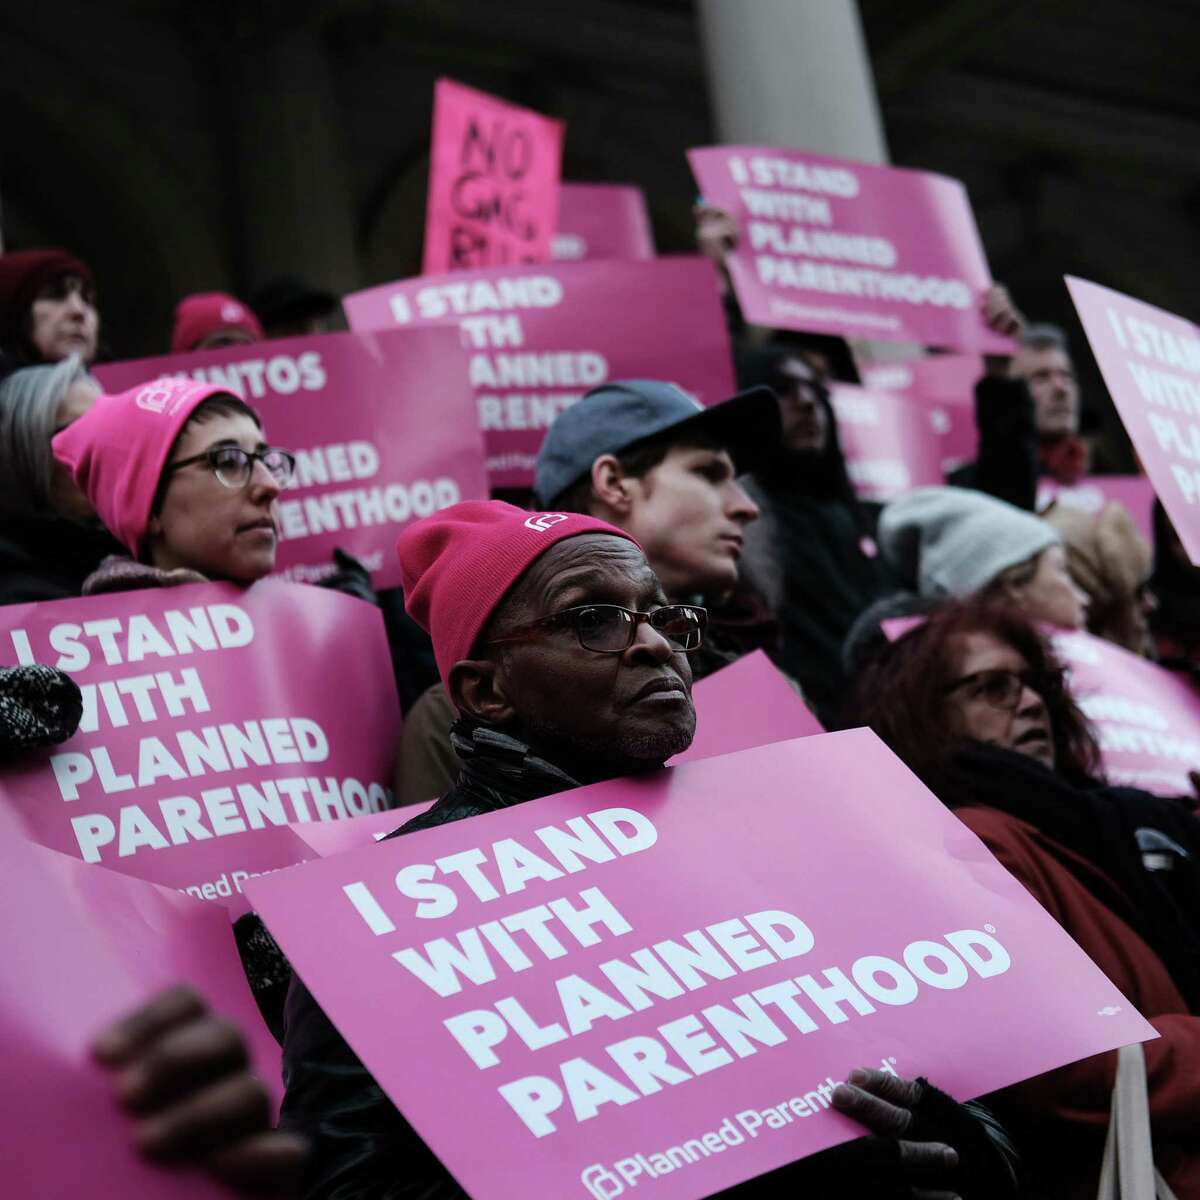 Pro-choice activists, politicians and others associated with Planned Parenthood gather for a news conference and demonstration at City Hall against the Trump administration’s Ttle X rule change on Feb, 25, 2019 in New York City. The proposed final rule for the Title X Family Planning Program, called the Gag Rule, would force a medical provider receiving federal assistance to refuse to promote, refer for, perform or support abortion as a method of family planning.